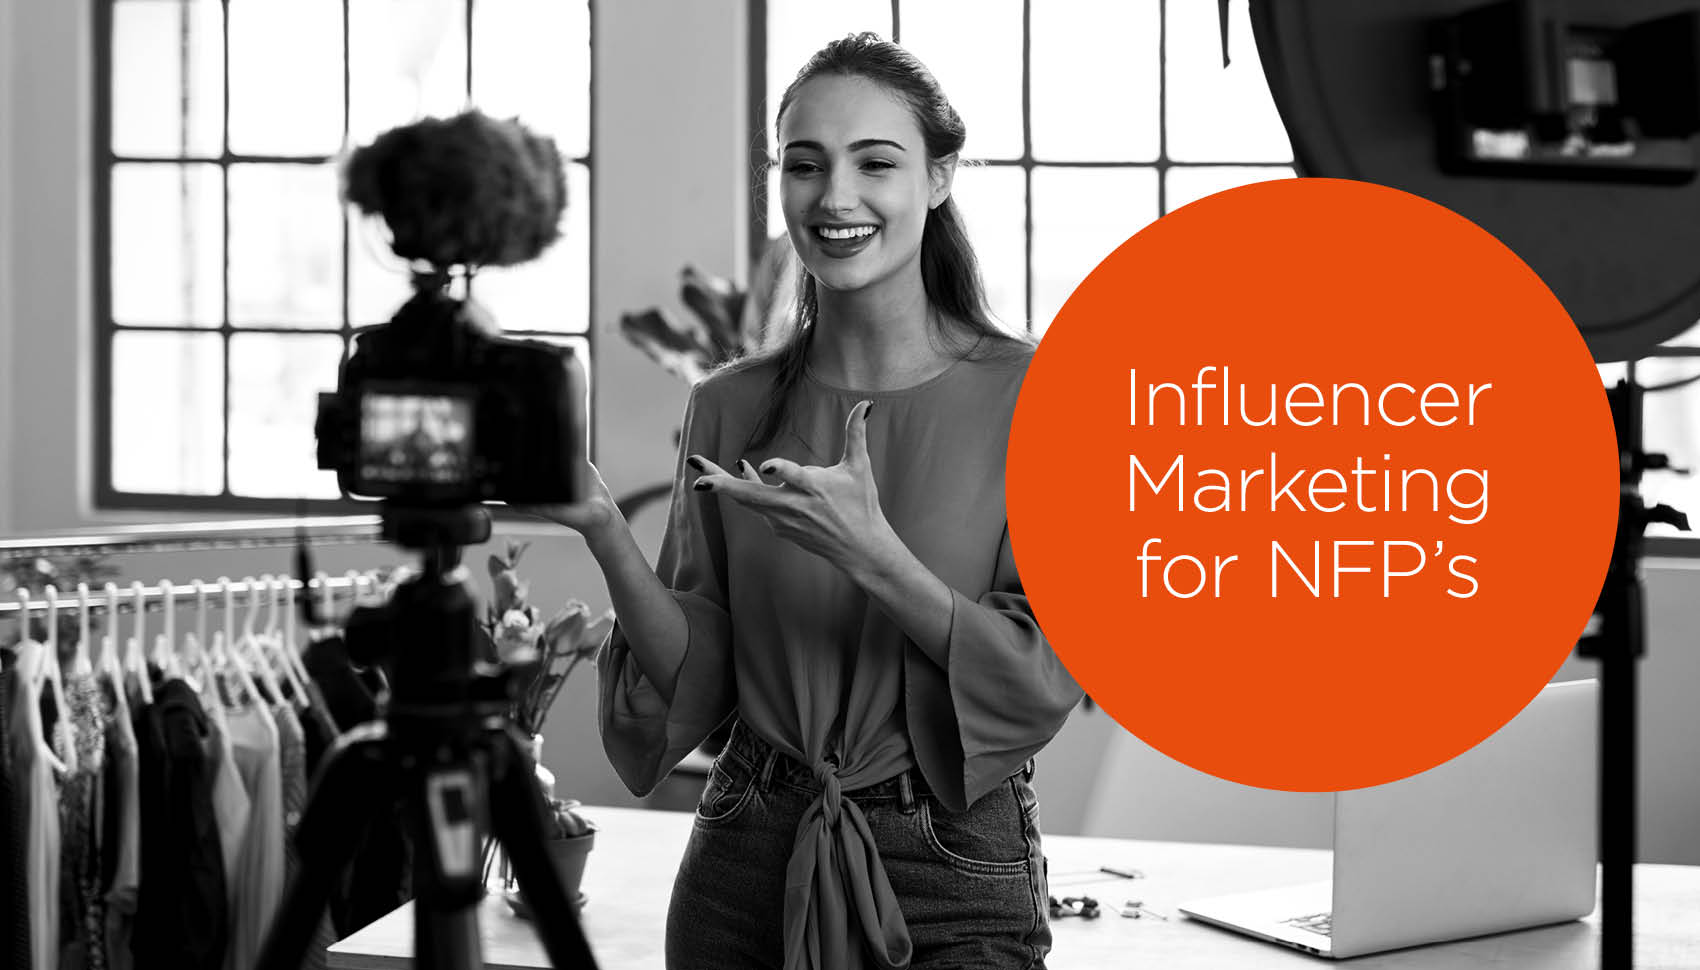 Influencer Marketing for NFP's